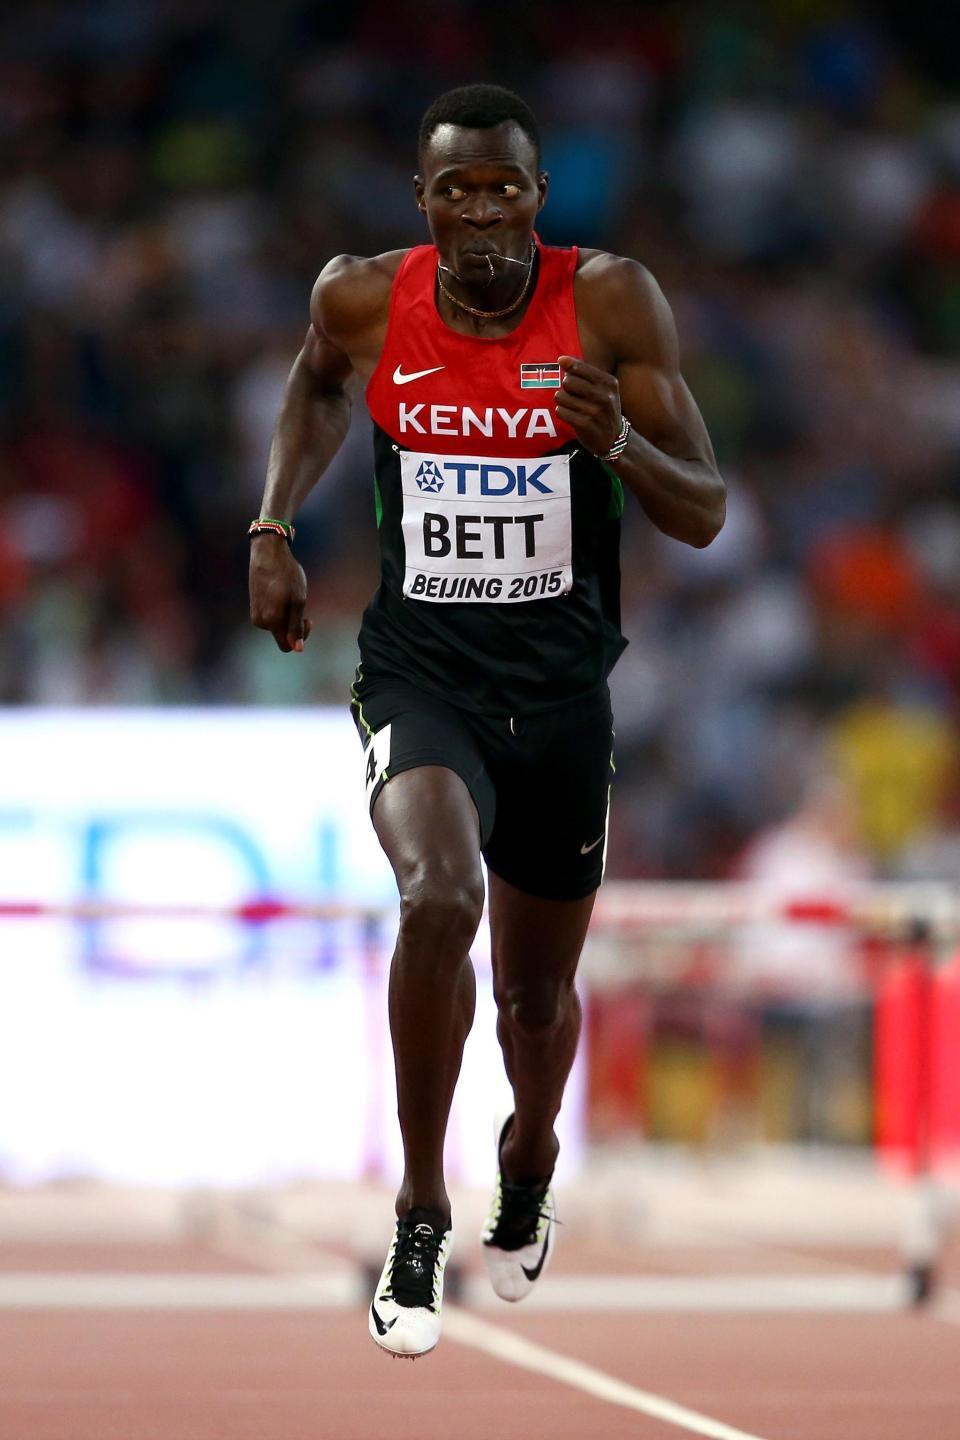  Bett was a two-time African Championship medallist hurdler